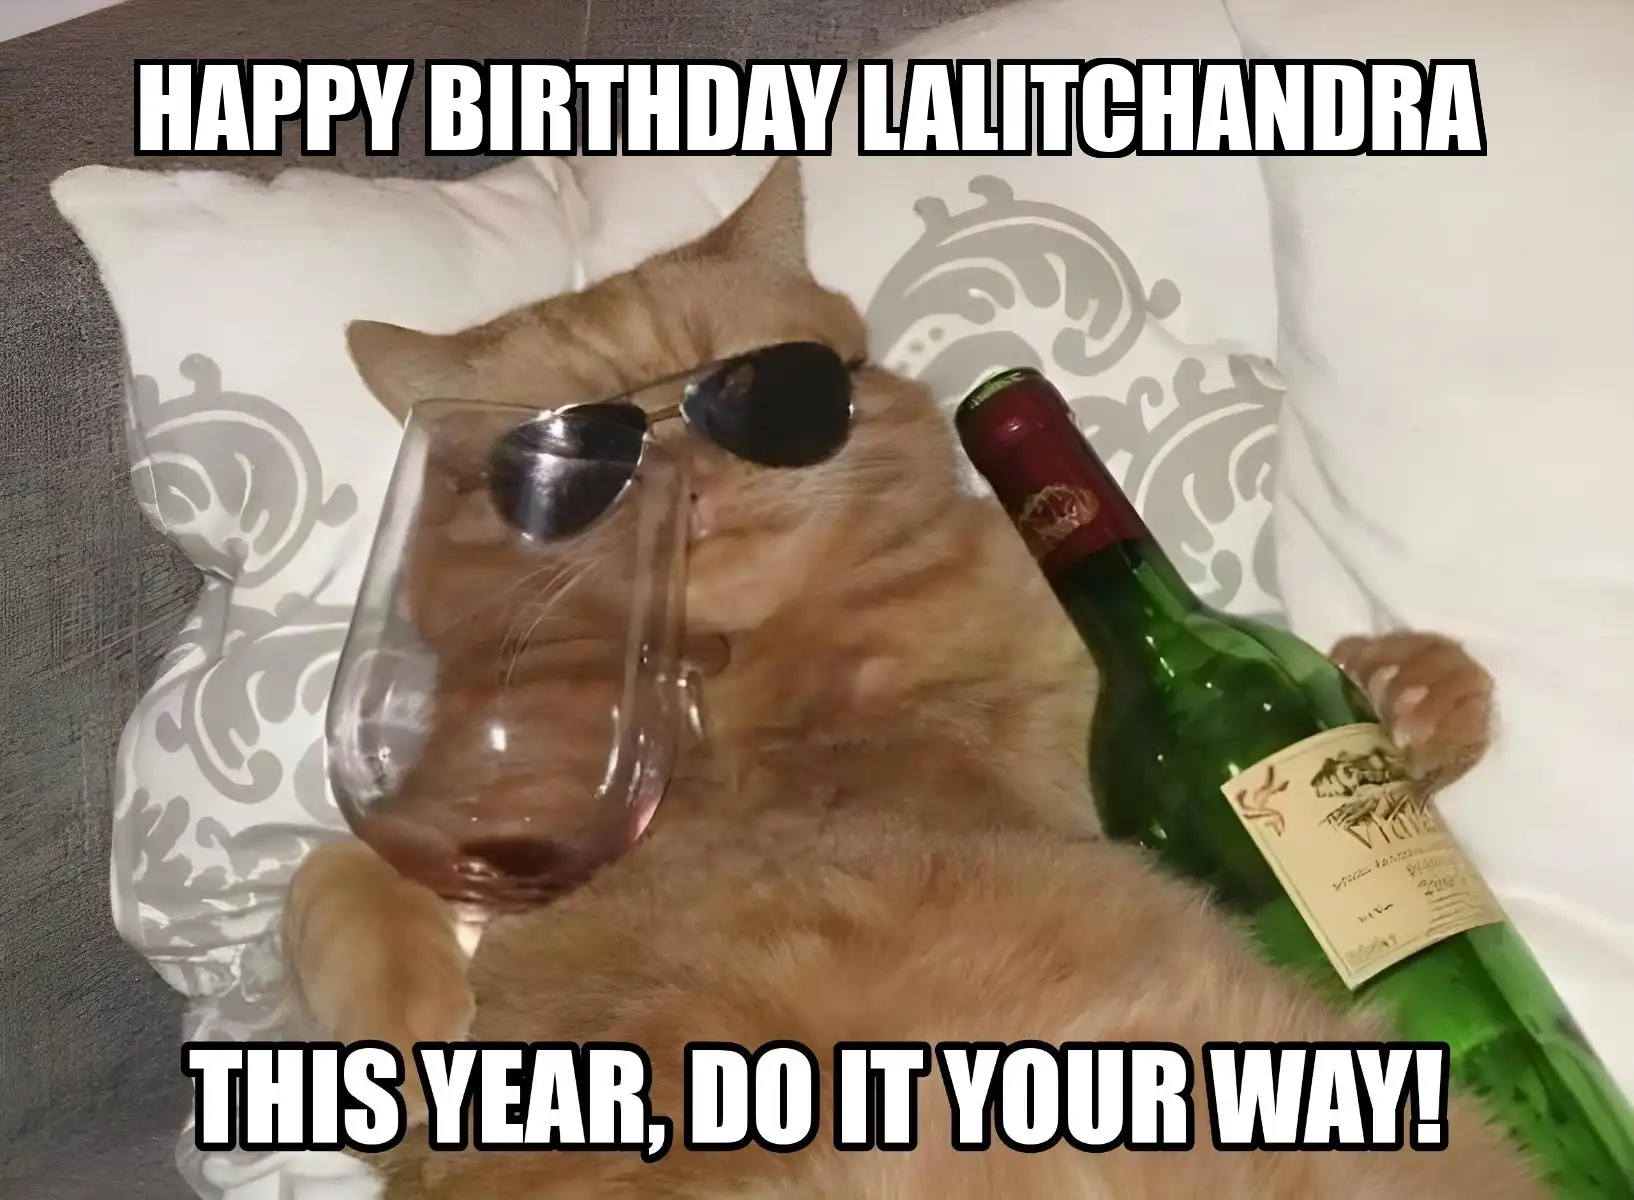 Happy Birthday Lalitchandra This Year Do It Your Way Meme